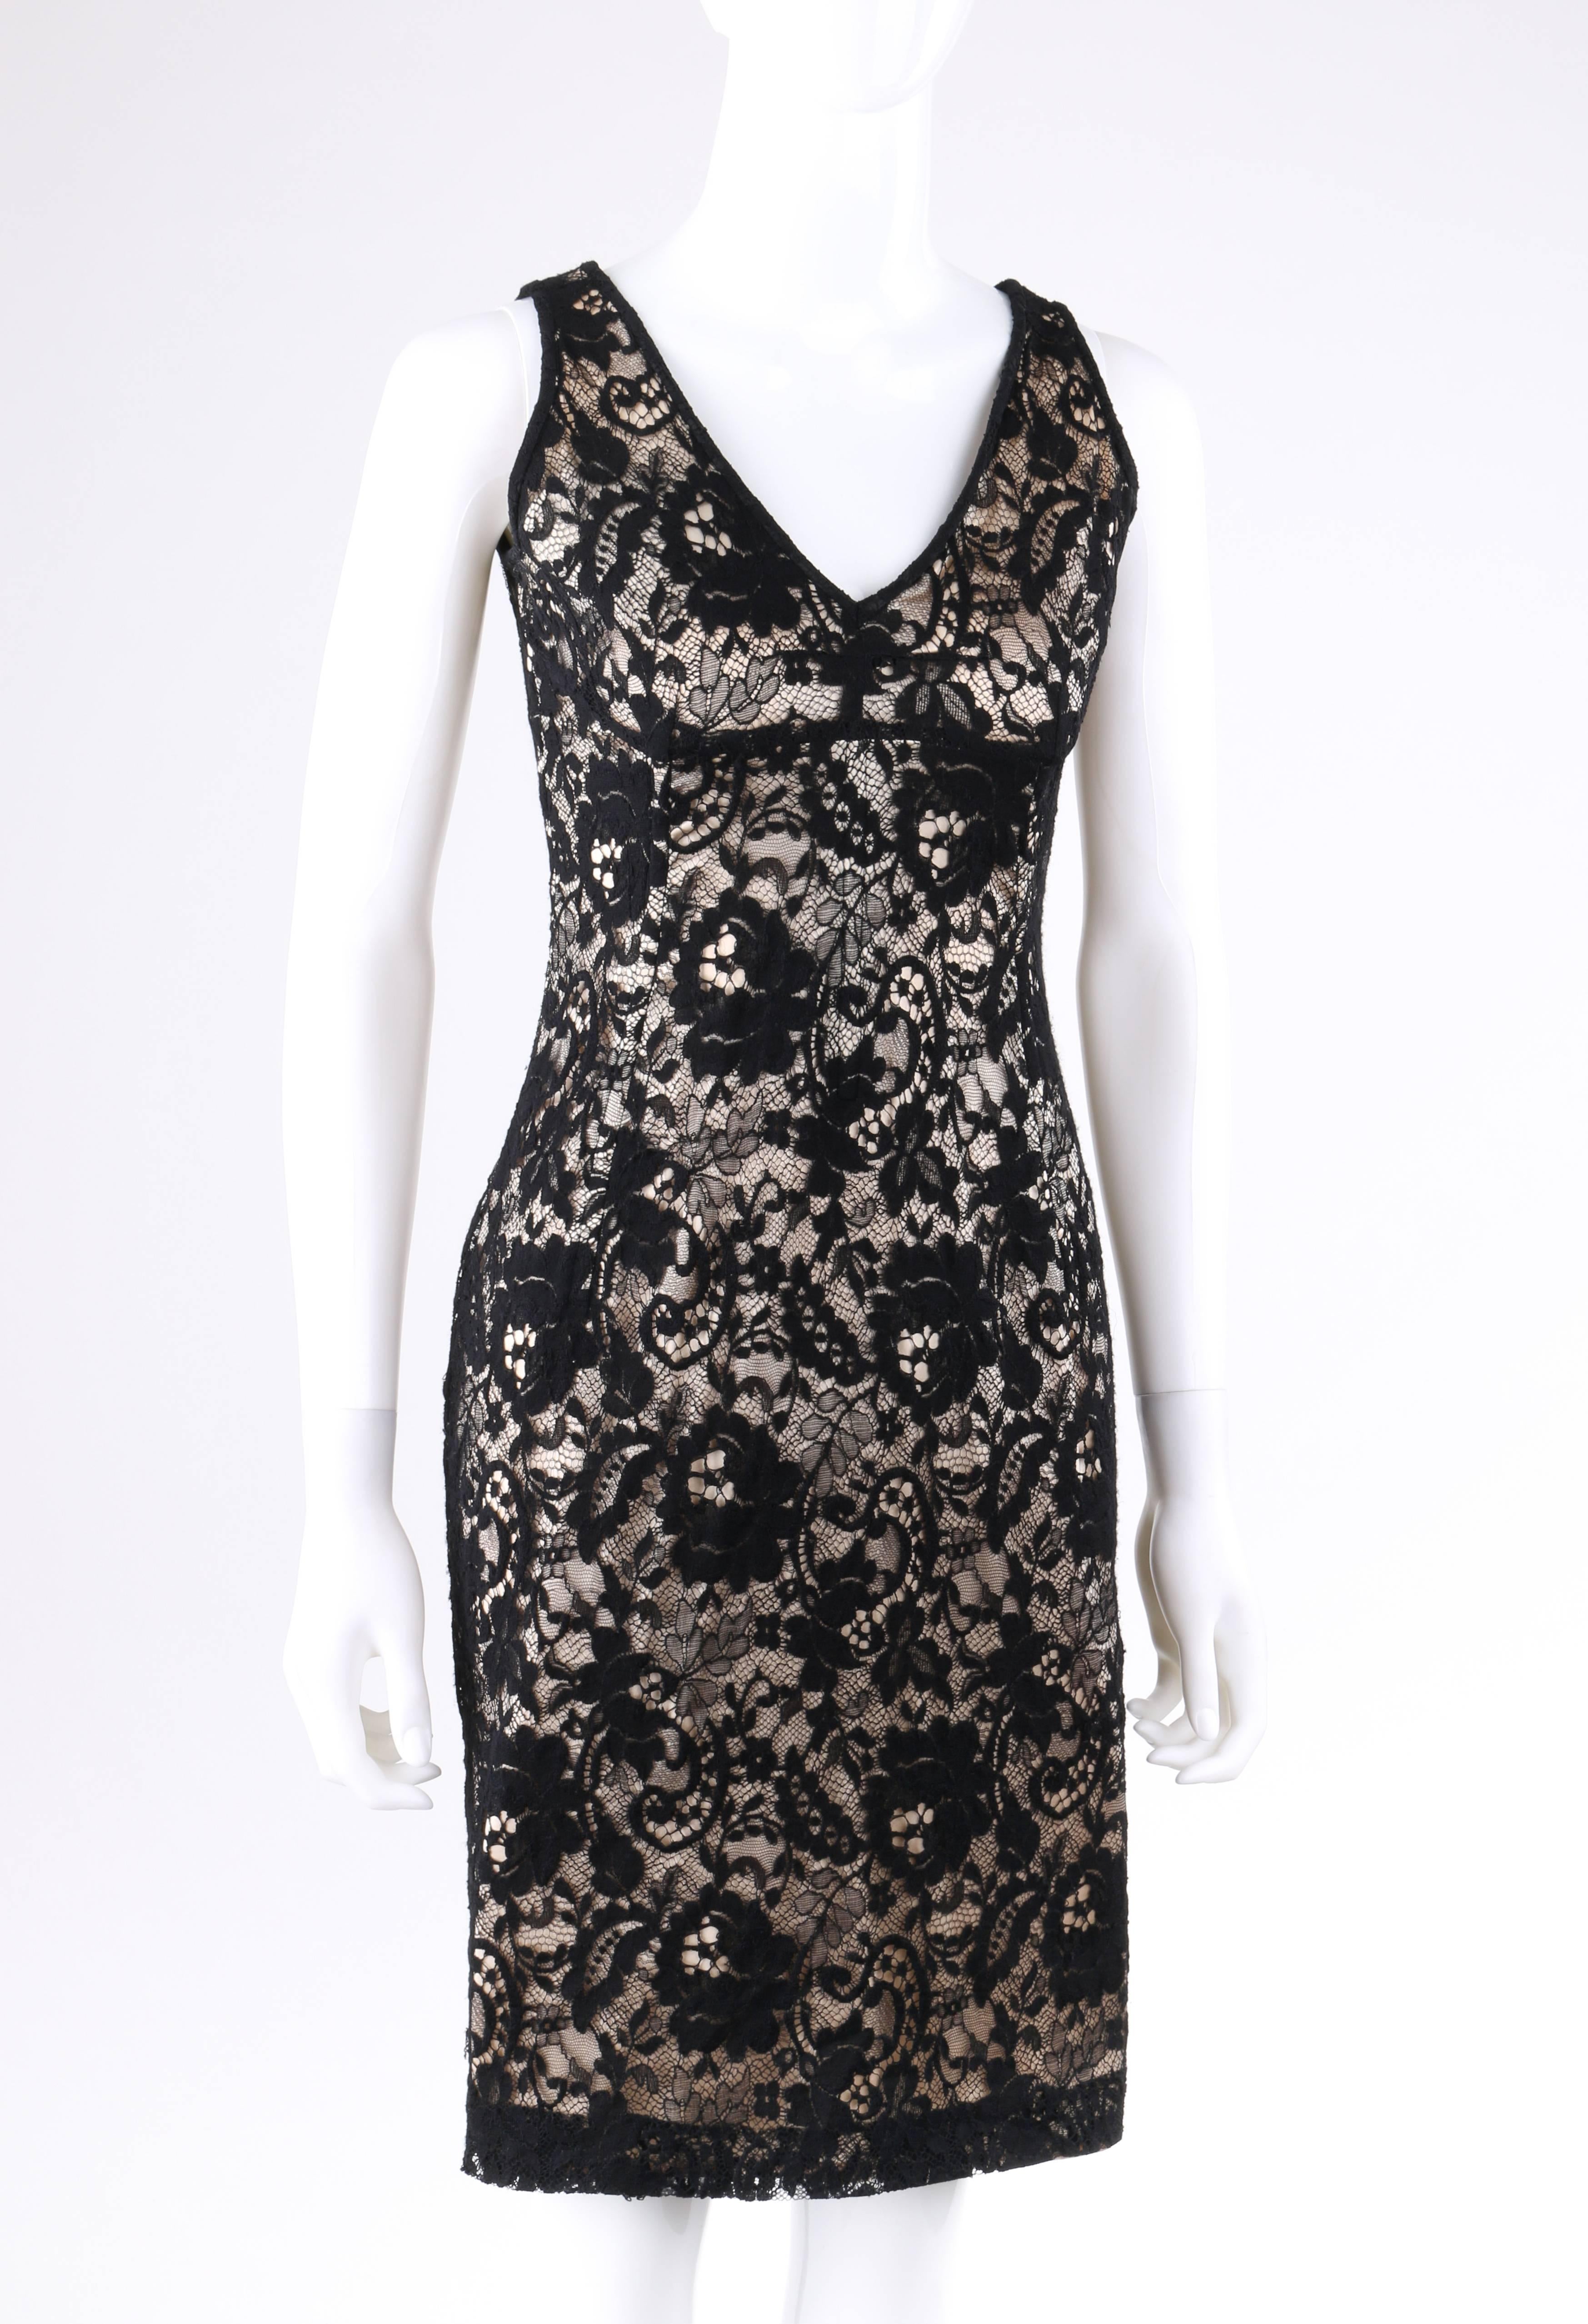 Dolce & Gabbana Autumn/Winter 2011 black floral lace overlay cocktail dress. Black floral lace overlaid nude stretch lining. Sheath style. Sleeveless, v-neckline. Empire waist. Center back invisible zipper with hook and eye closure at top. Fully